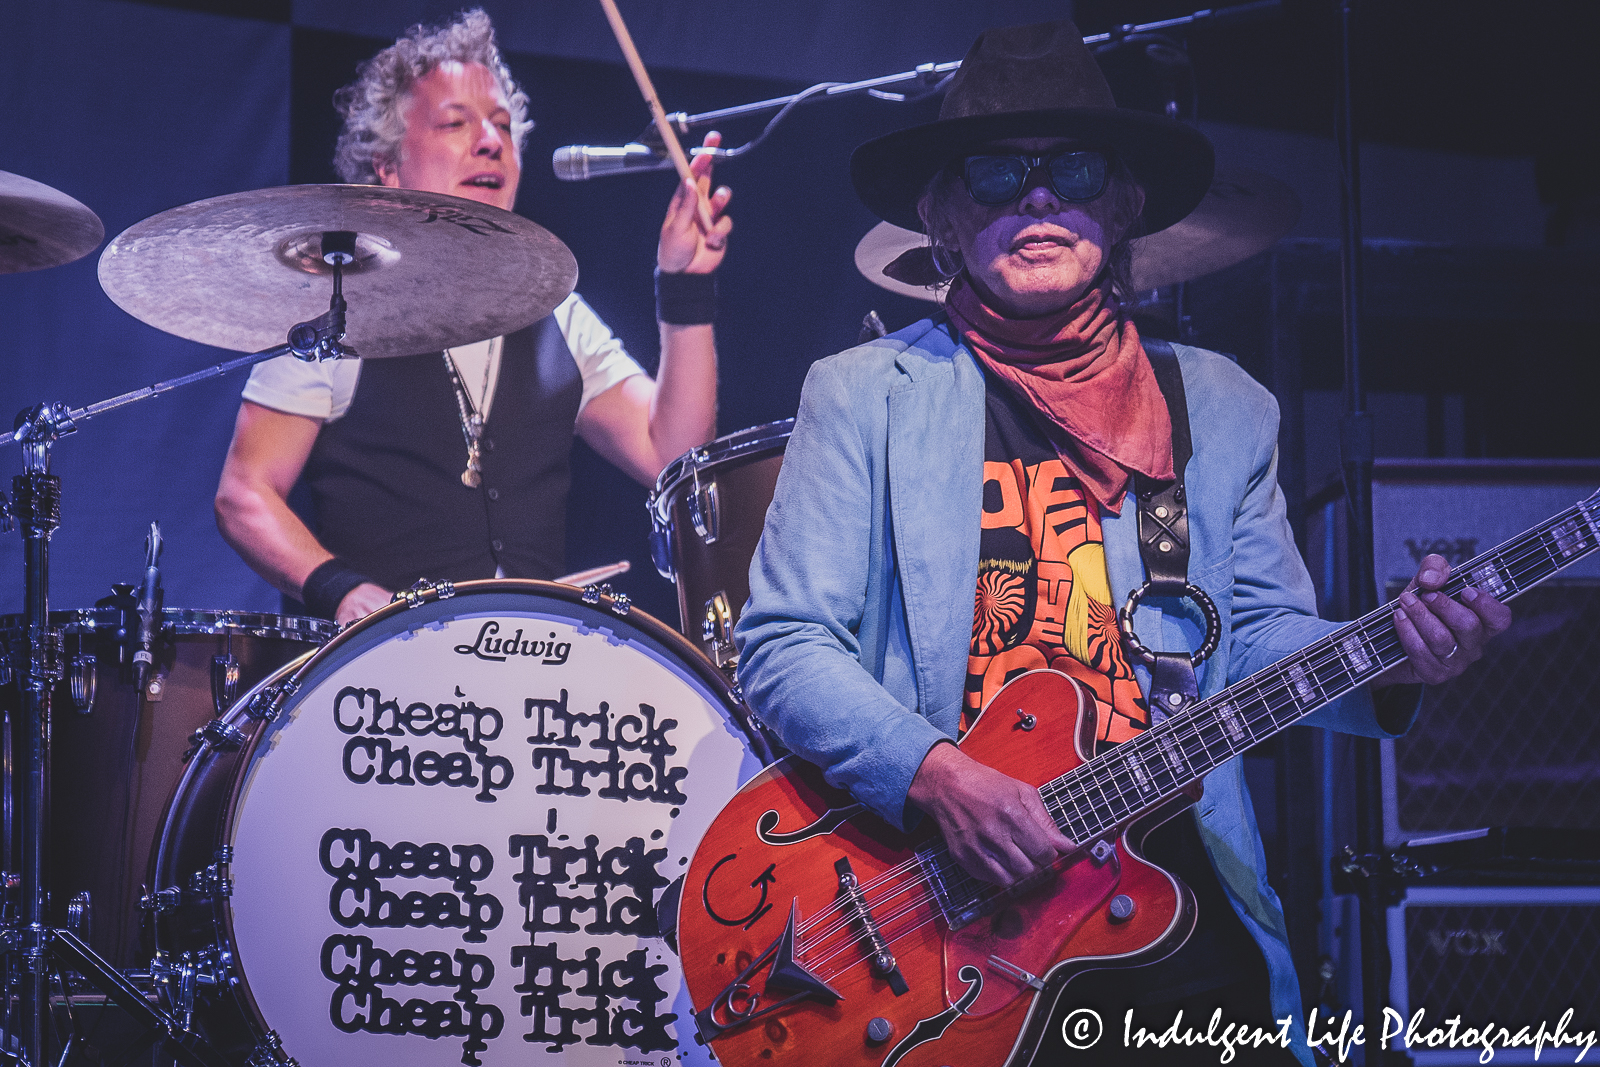 Cheap Trick bass guitarist Tom Petersson live in concert with drummer Daxx Nielsen at Uptown Theater in Kansas City, MO on September 13, 2022.